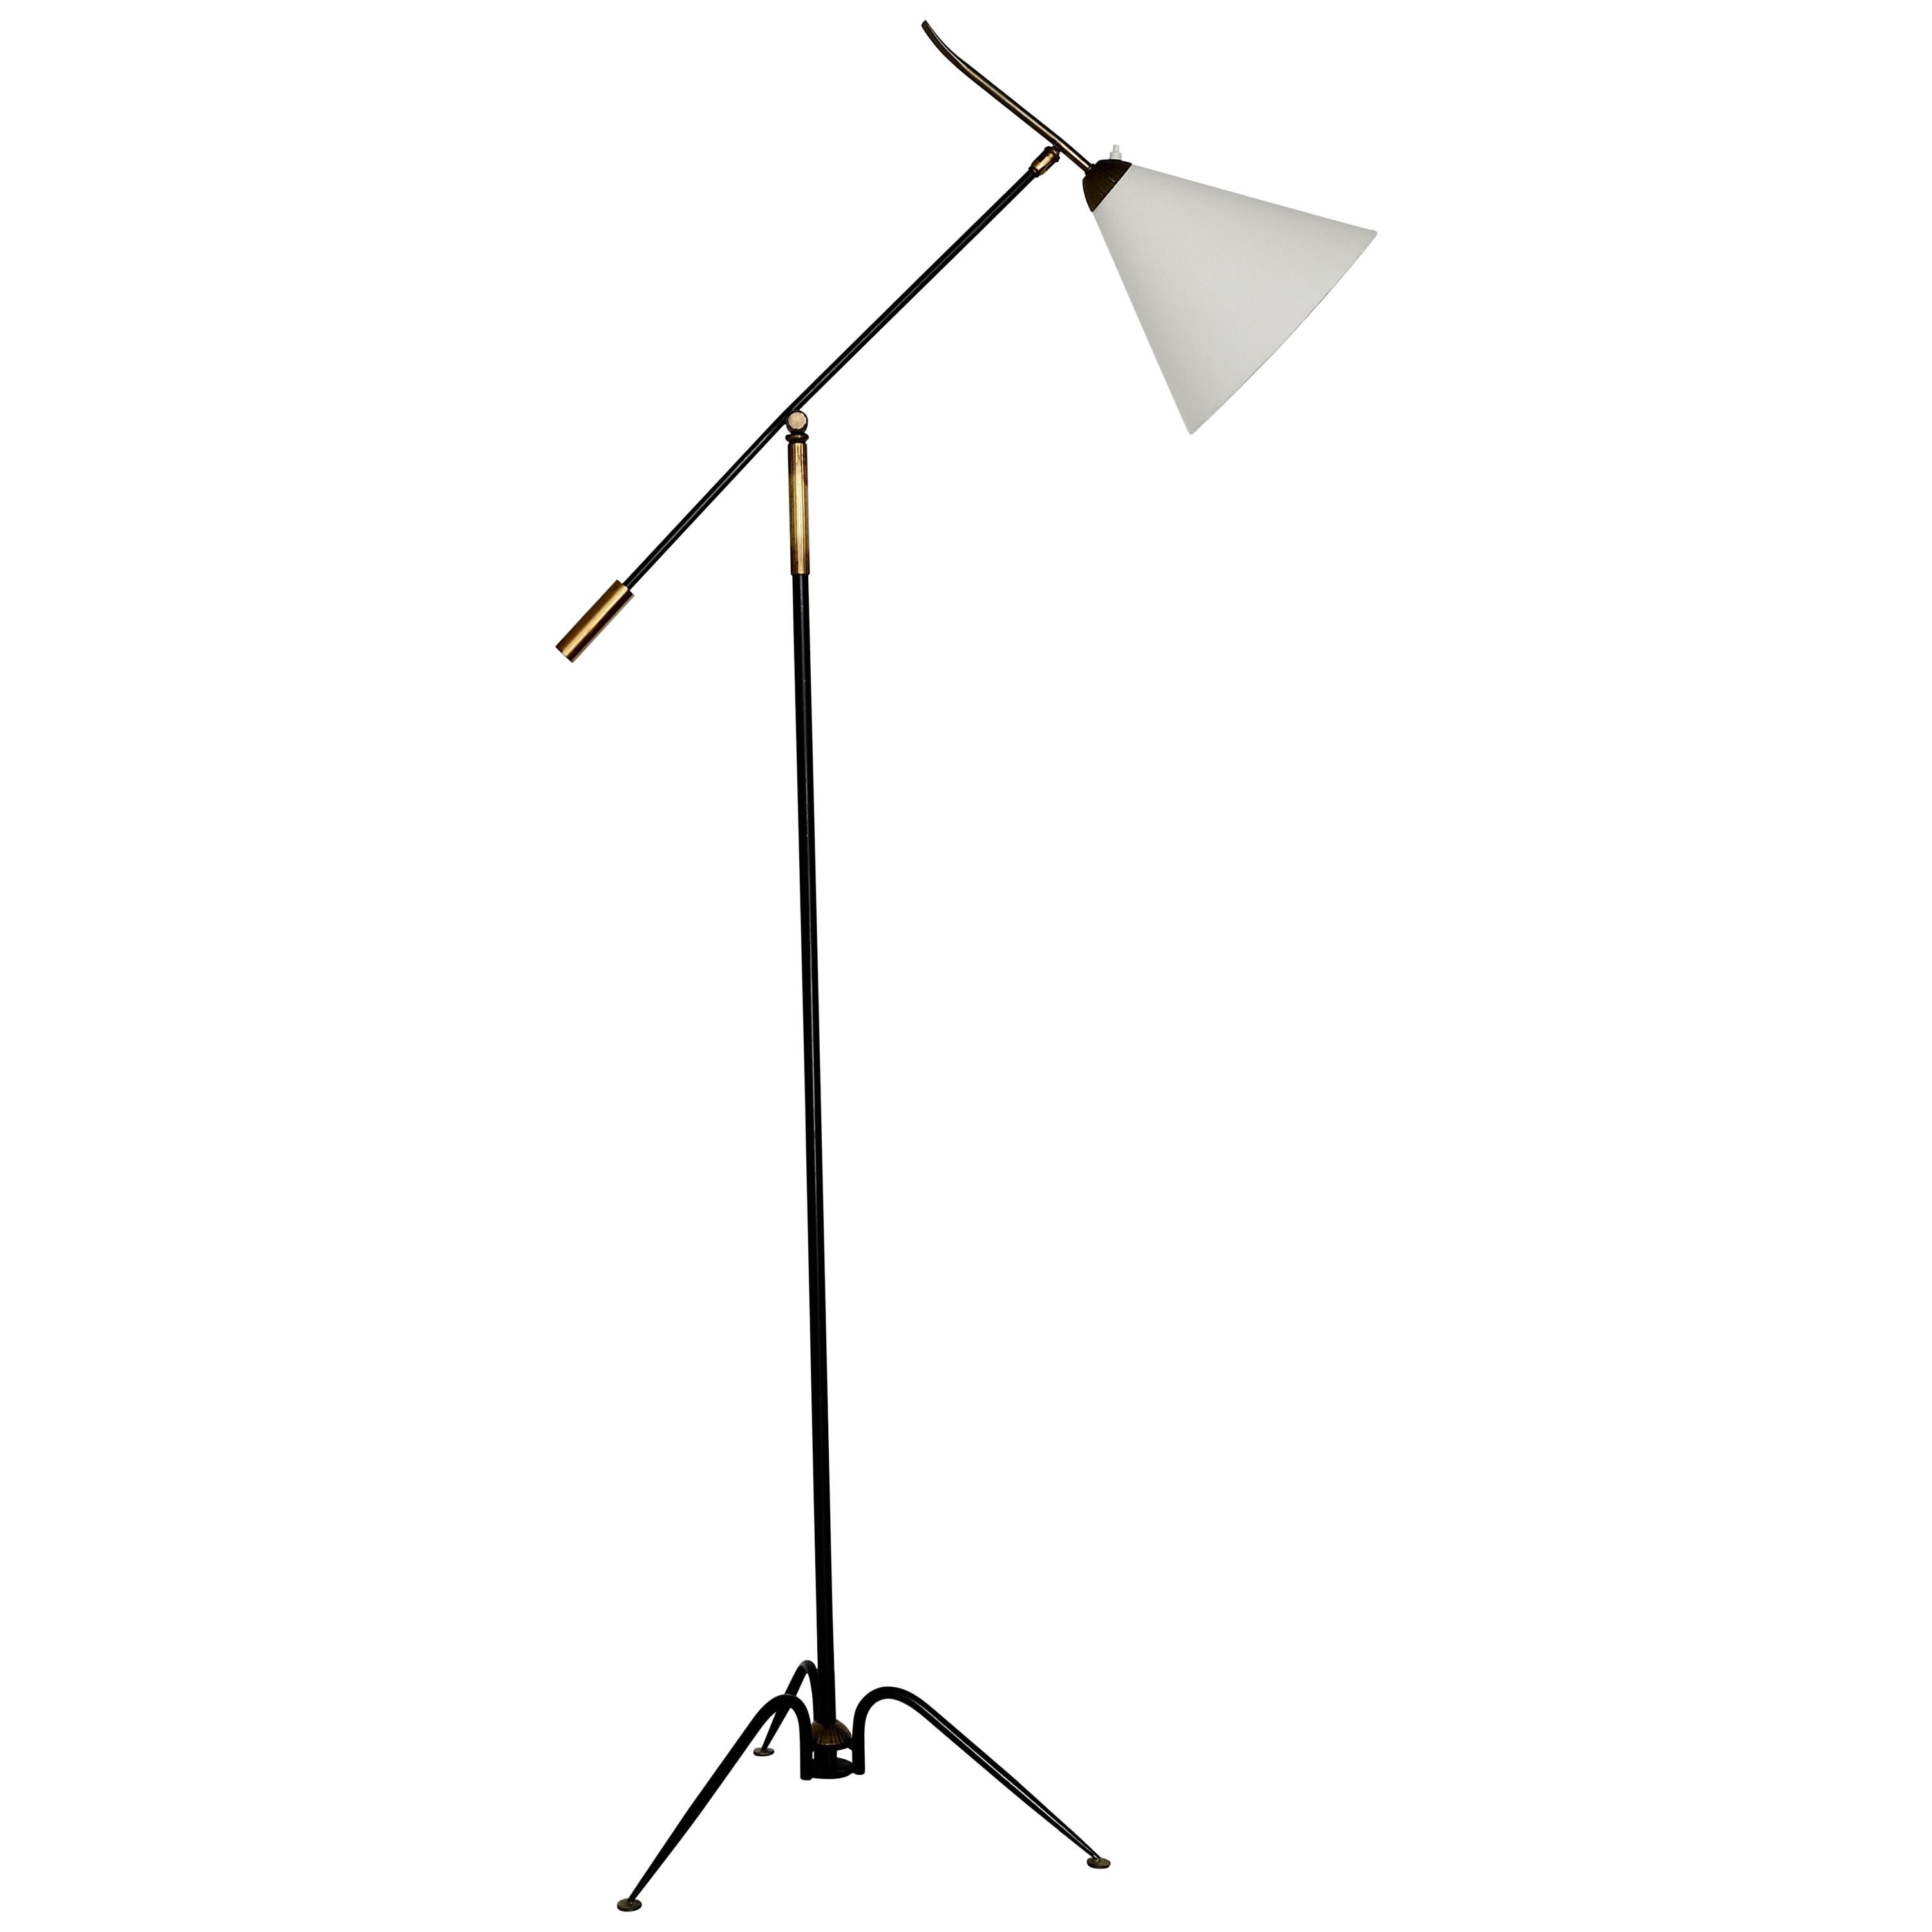 This tripod French floor lamp is made of black iron and bronze. It has an articulating arm which is adjustable as is the angle of the shade. The cone shade is new and has been rewired for use in the United States. The workmanship throughout is high